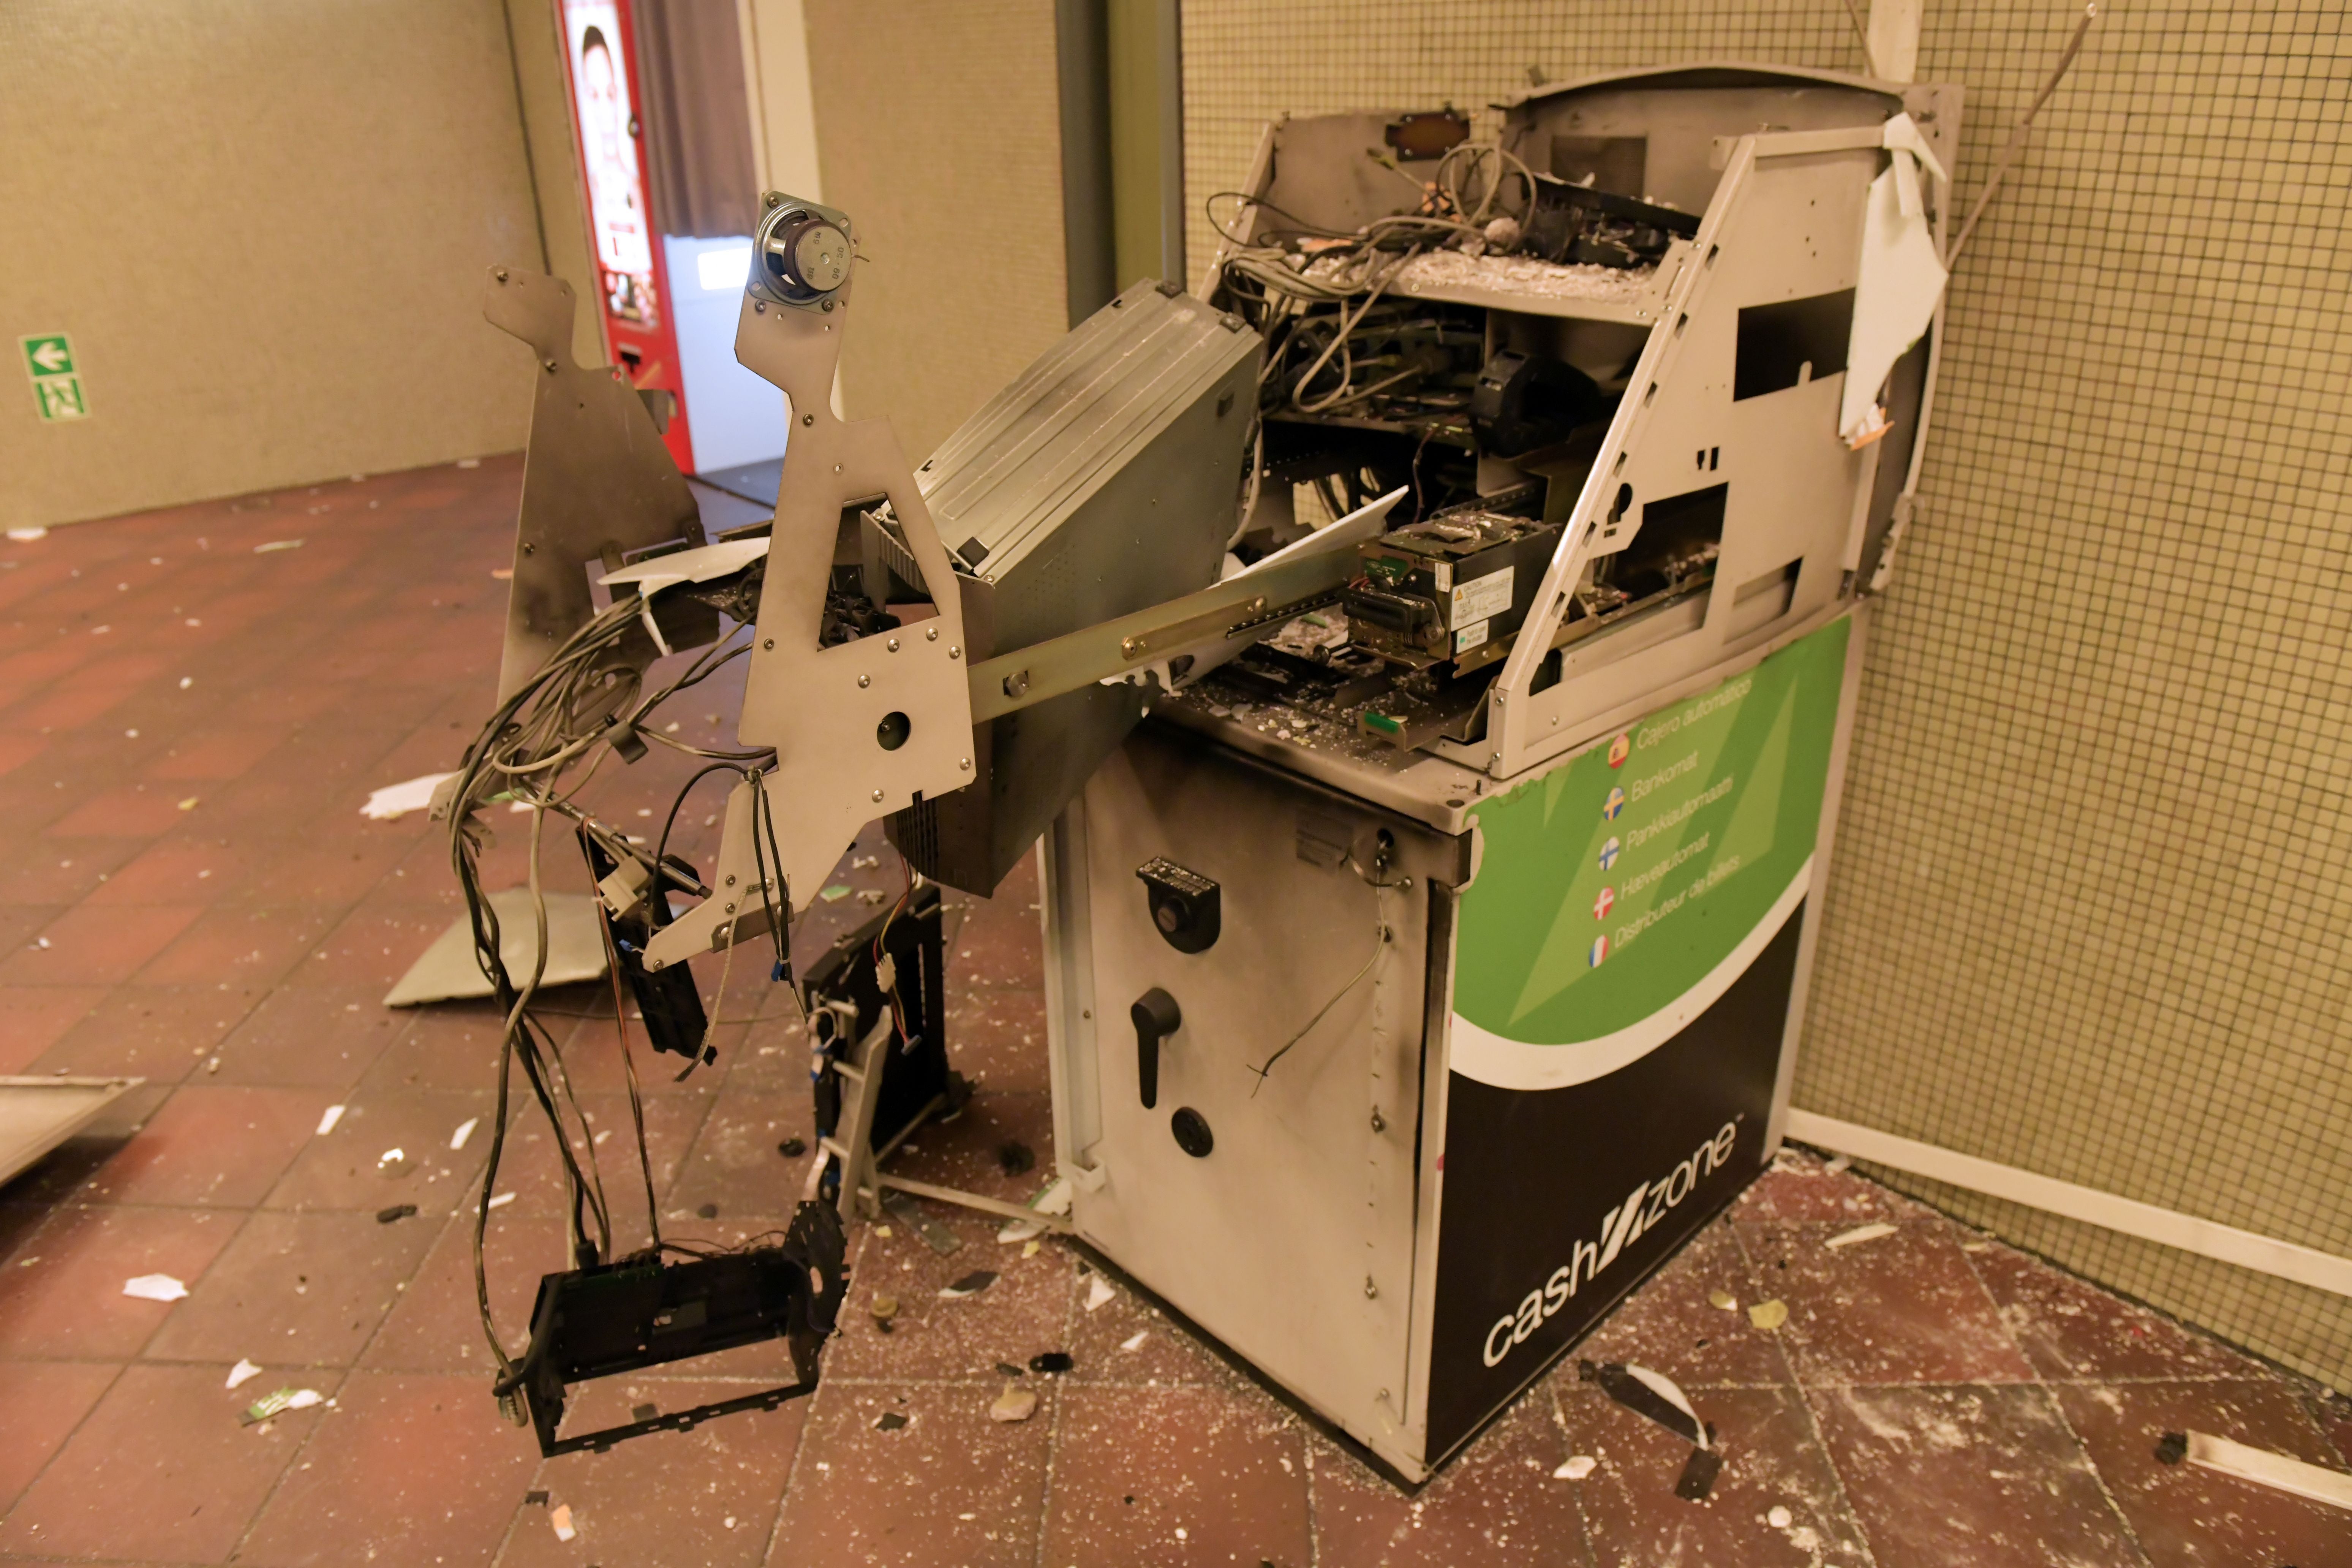 File: Picture taken on 2 May 2019 shows a blown-up ATM in an underground station in Berlin, Germany. A joint investigation between Dutch and German officials has led to the arrest of nine suspects of a criminal gang that used to blow up ATM machines in Germany